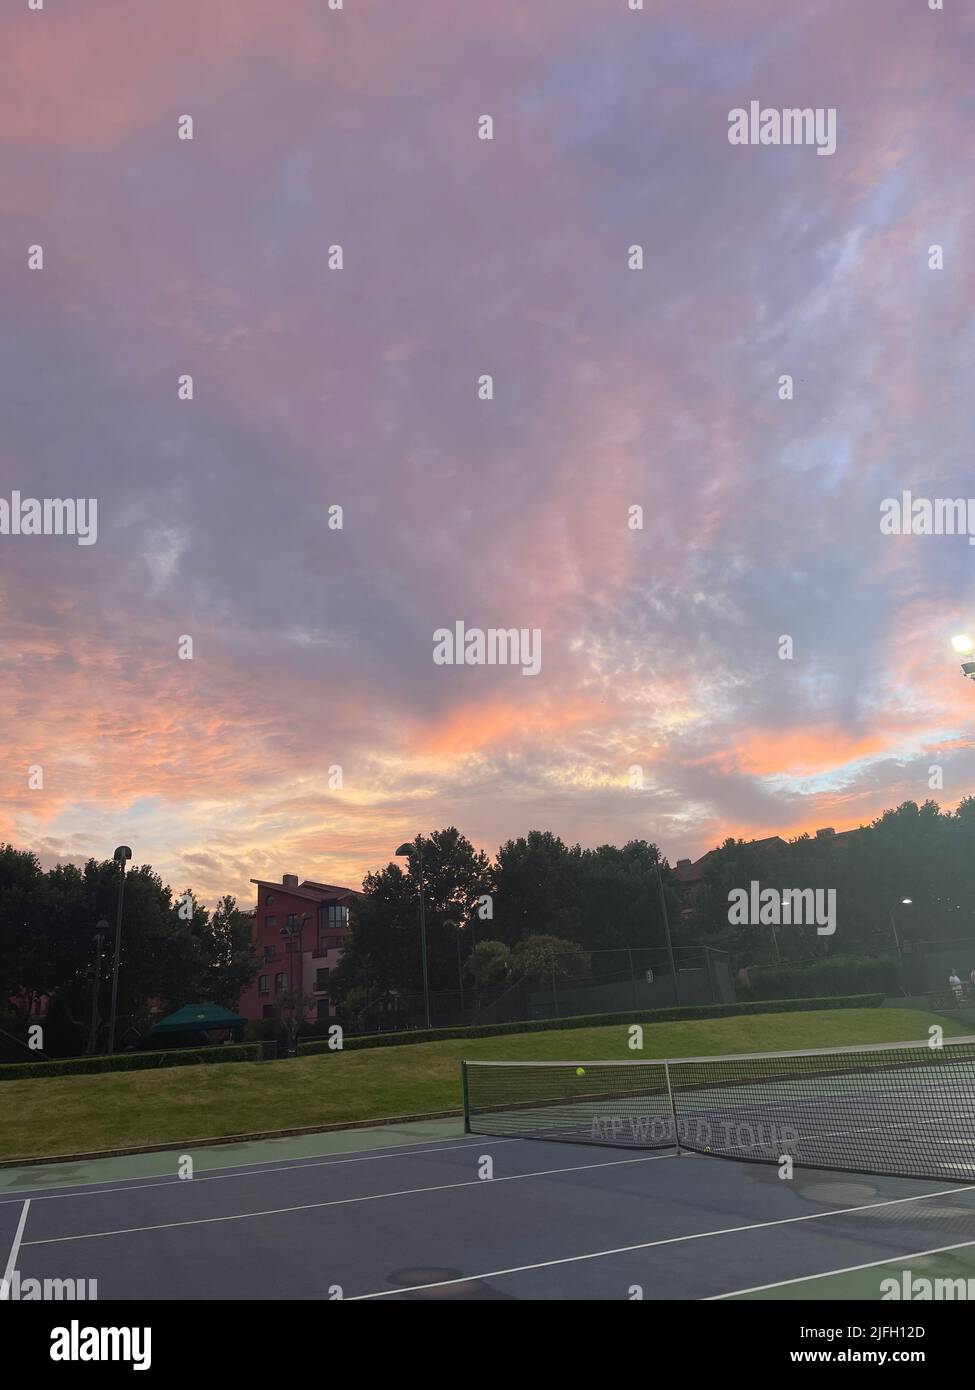 Sunset over the tennis courts in Huacao town, Minhang district, Shanghai Stock Photo